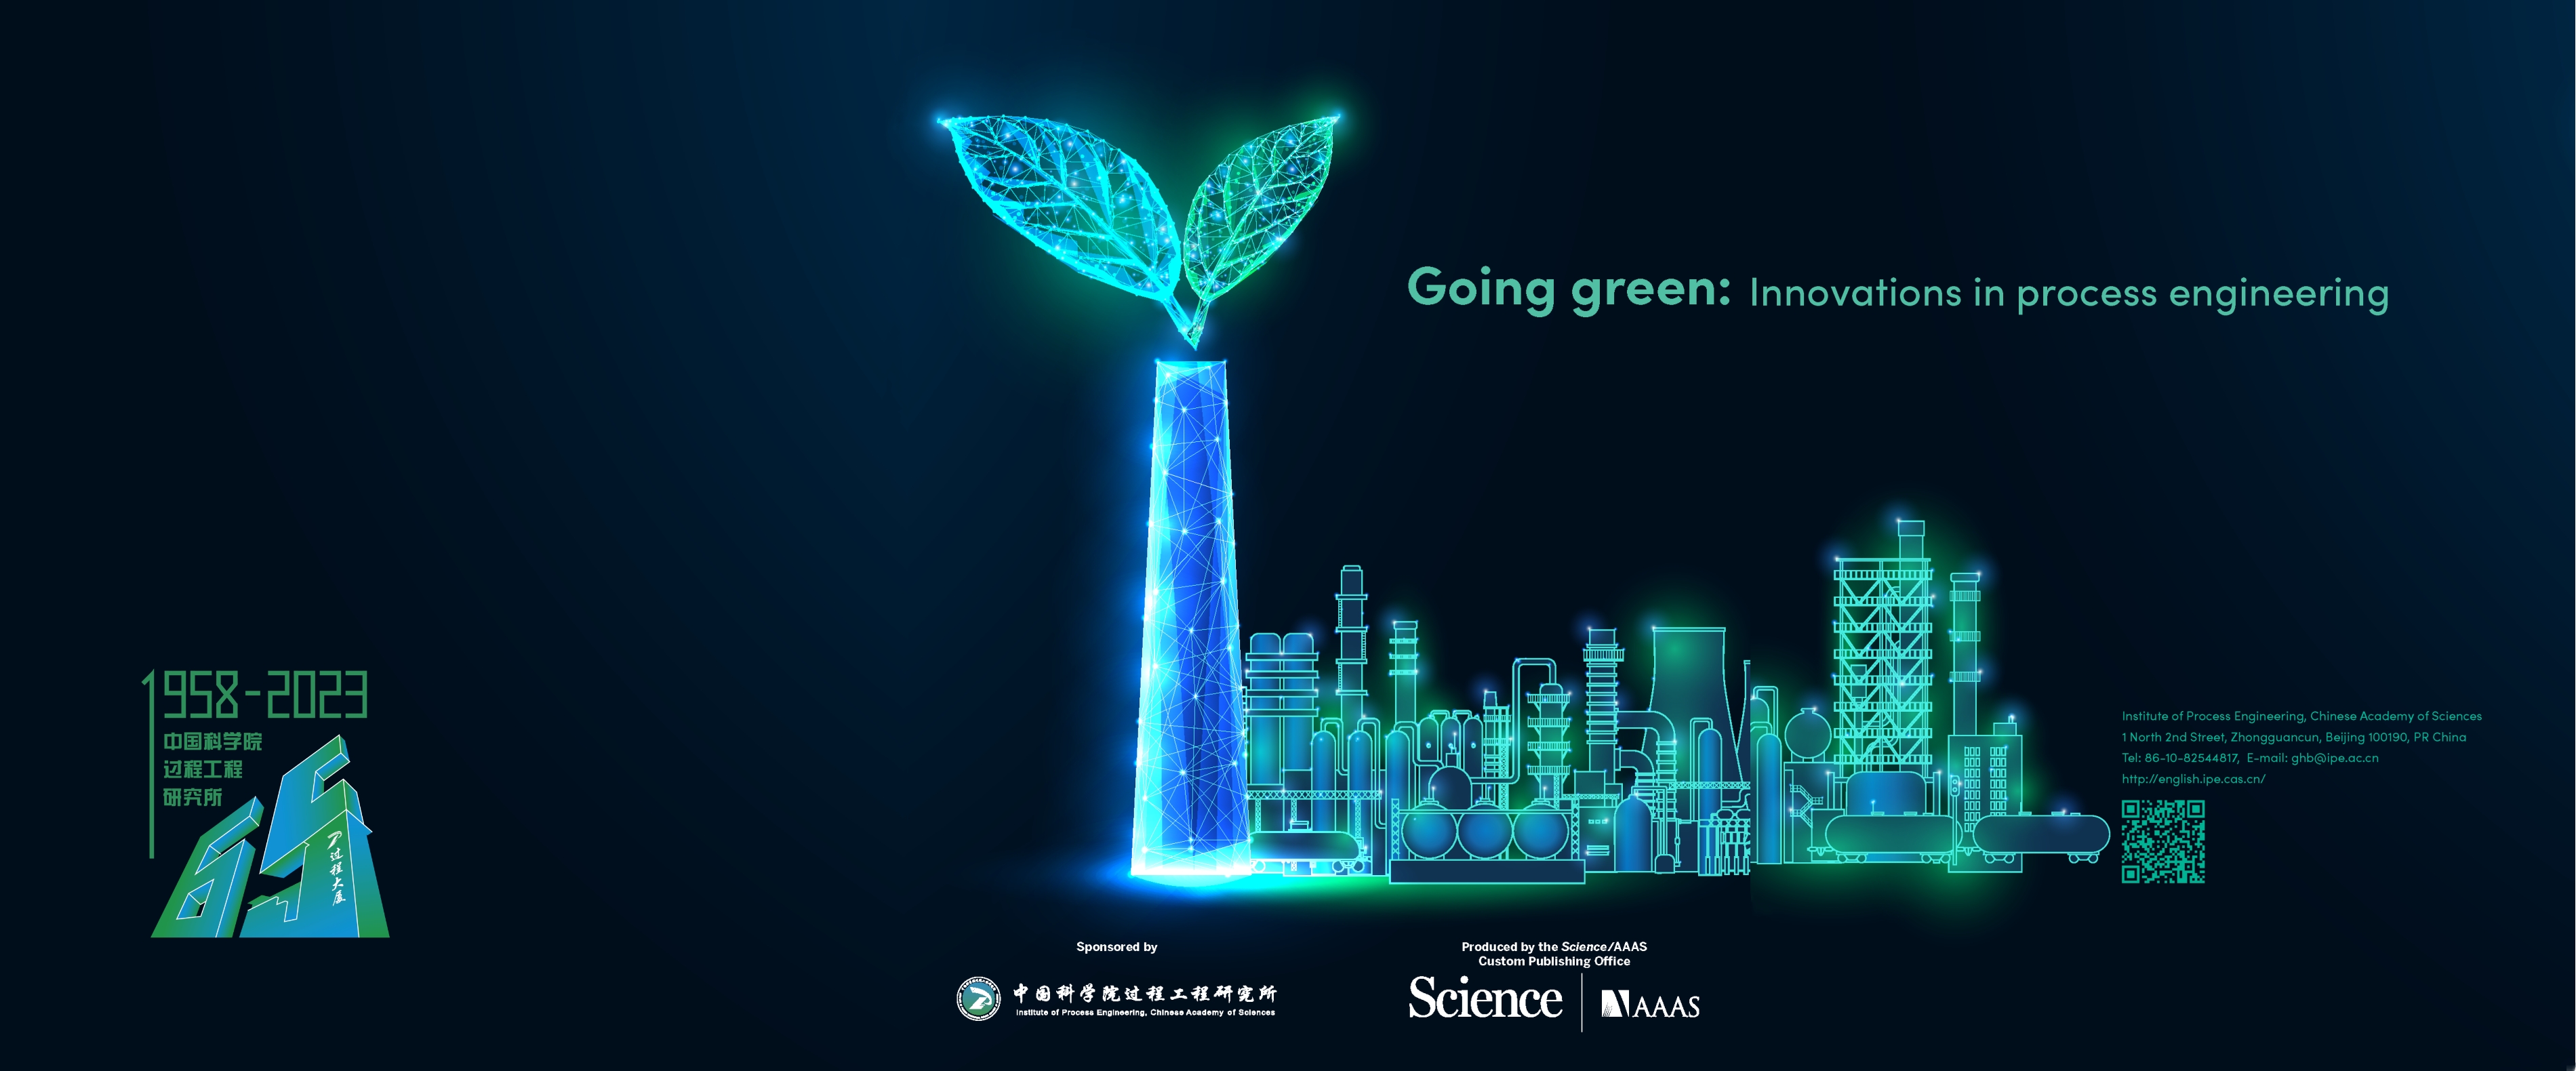 Going Green: Innovations in Processing Engineering